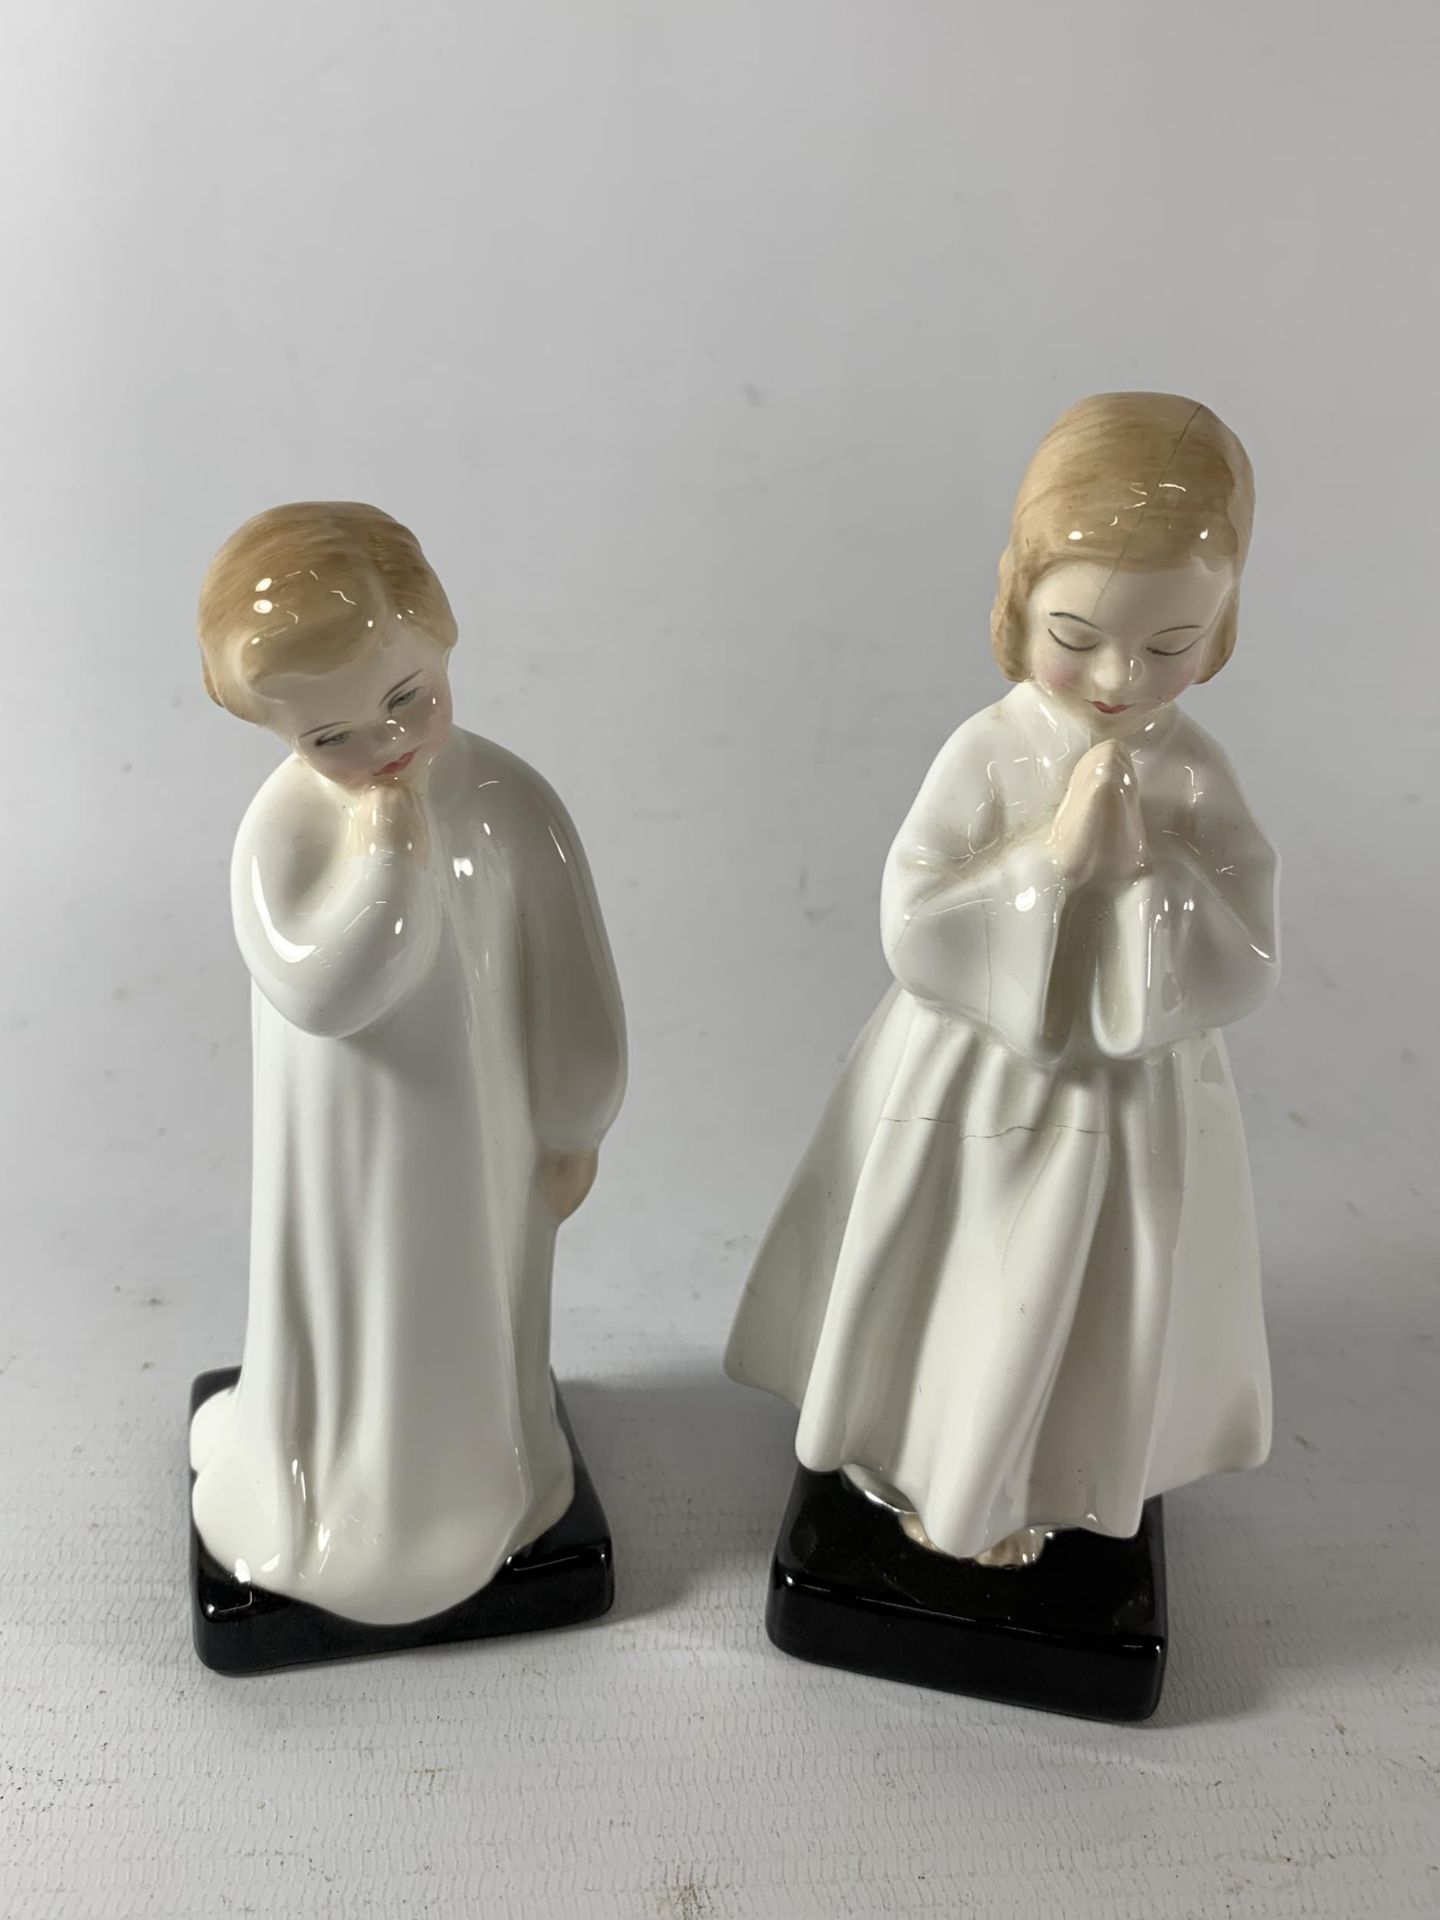 TWO ROYAL DOULTON FIGURES - BEDTIME (A/F) & DARLING